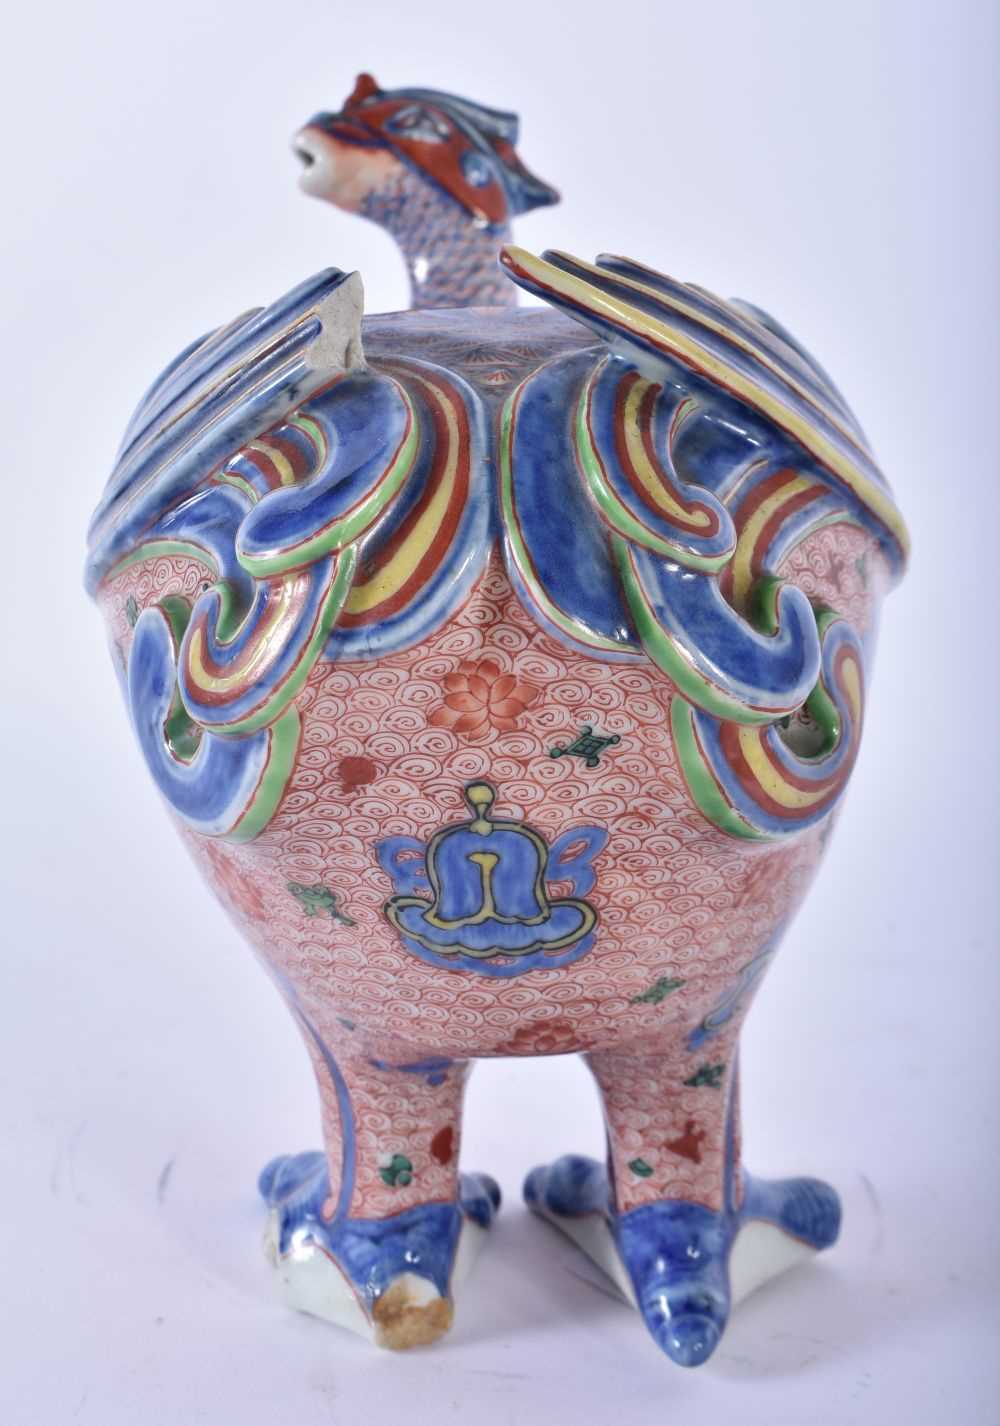 A VERY RARE 18TH CENTURY CHINESE PORCELAIN BIRD FORM CENSER modelled as a standing mythical bird - Image 4 of 6